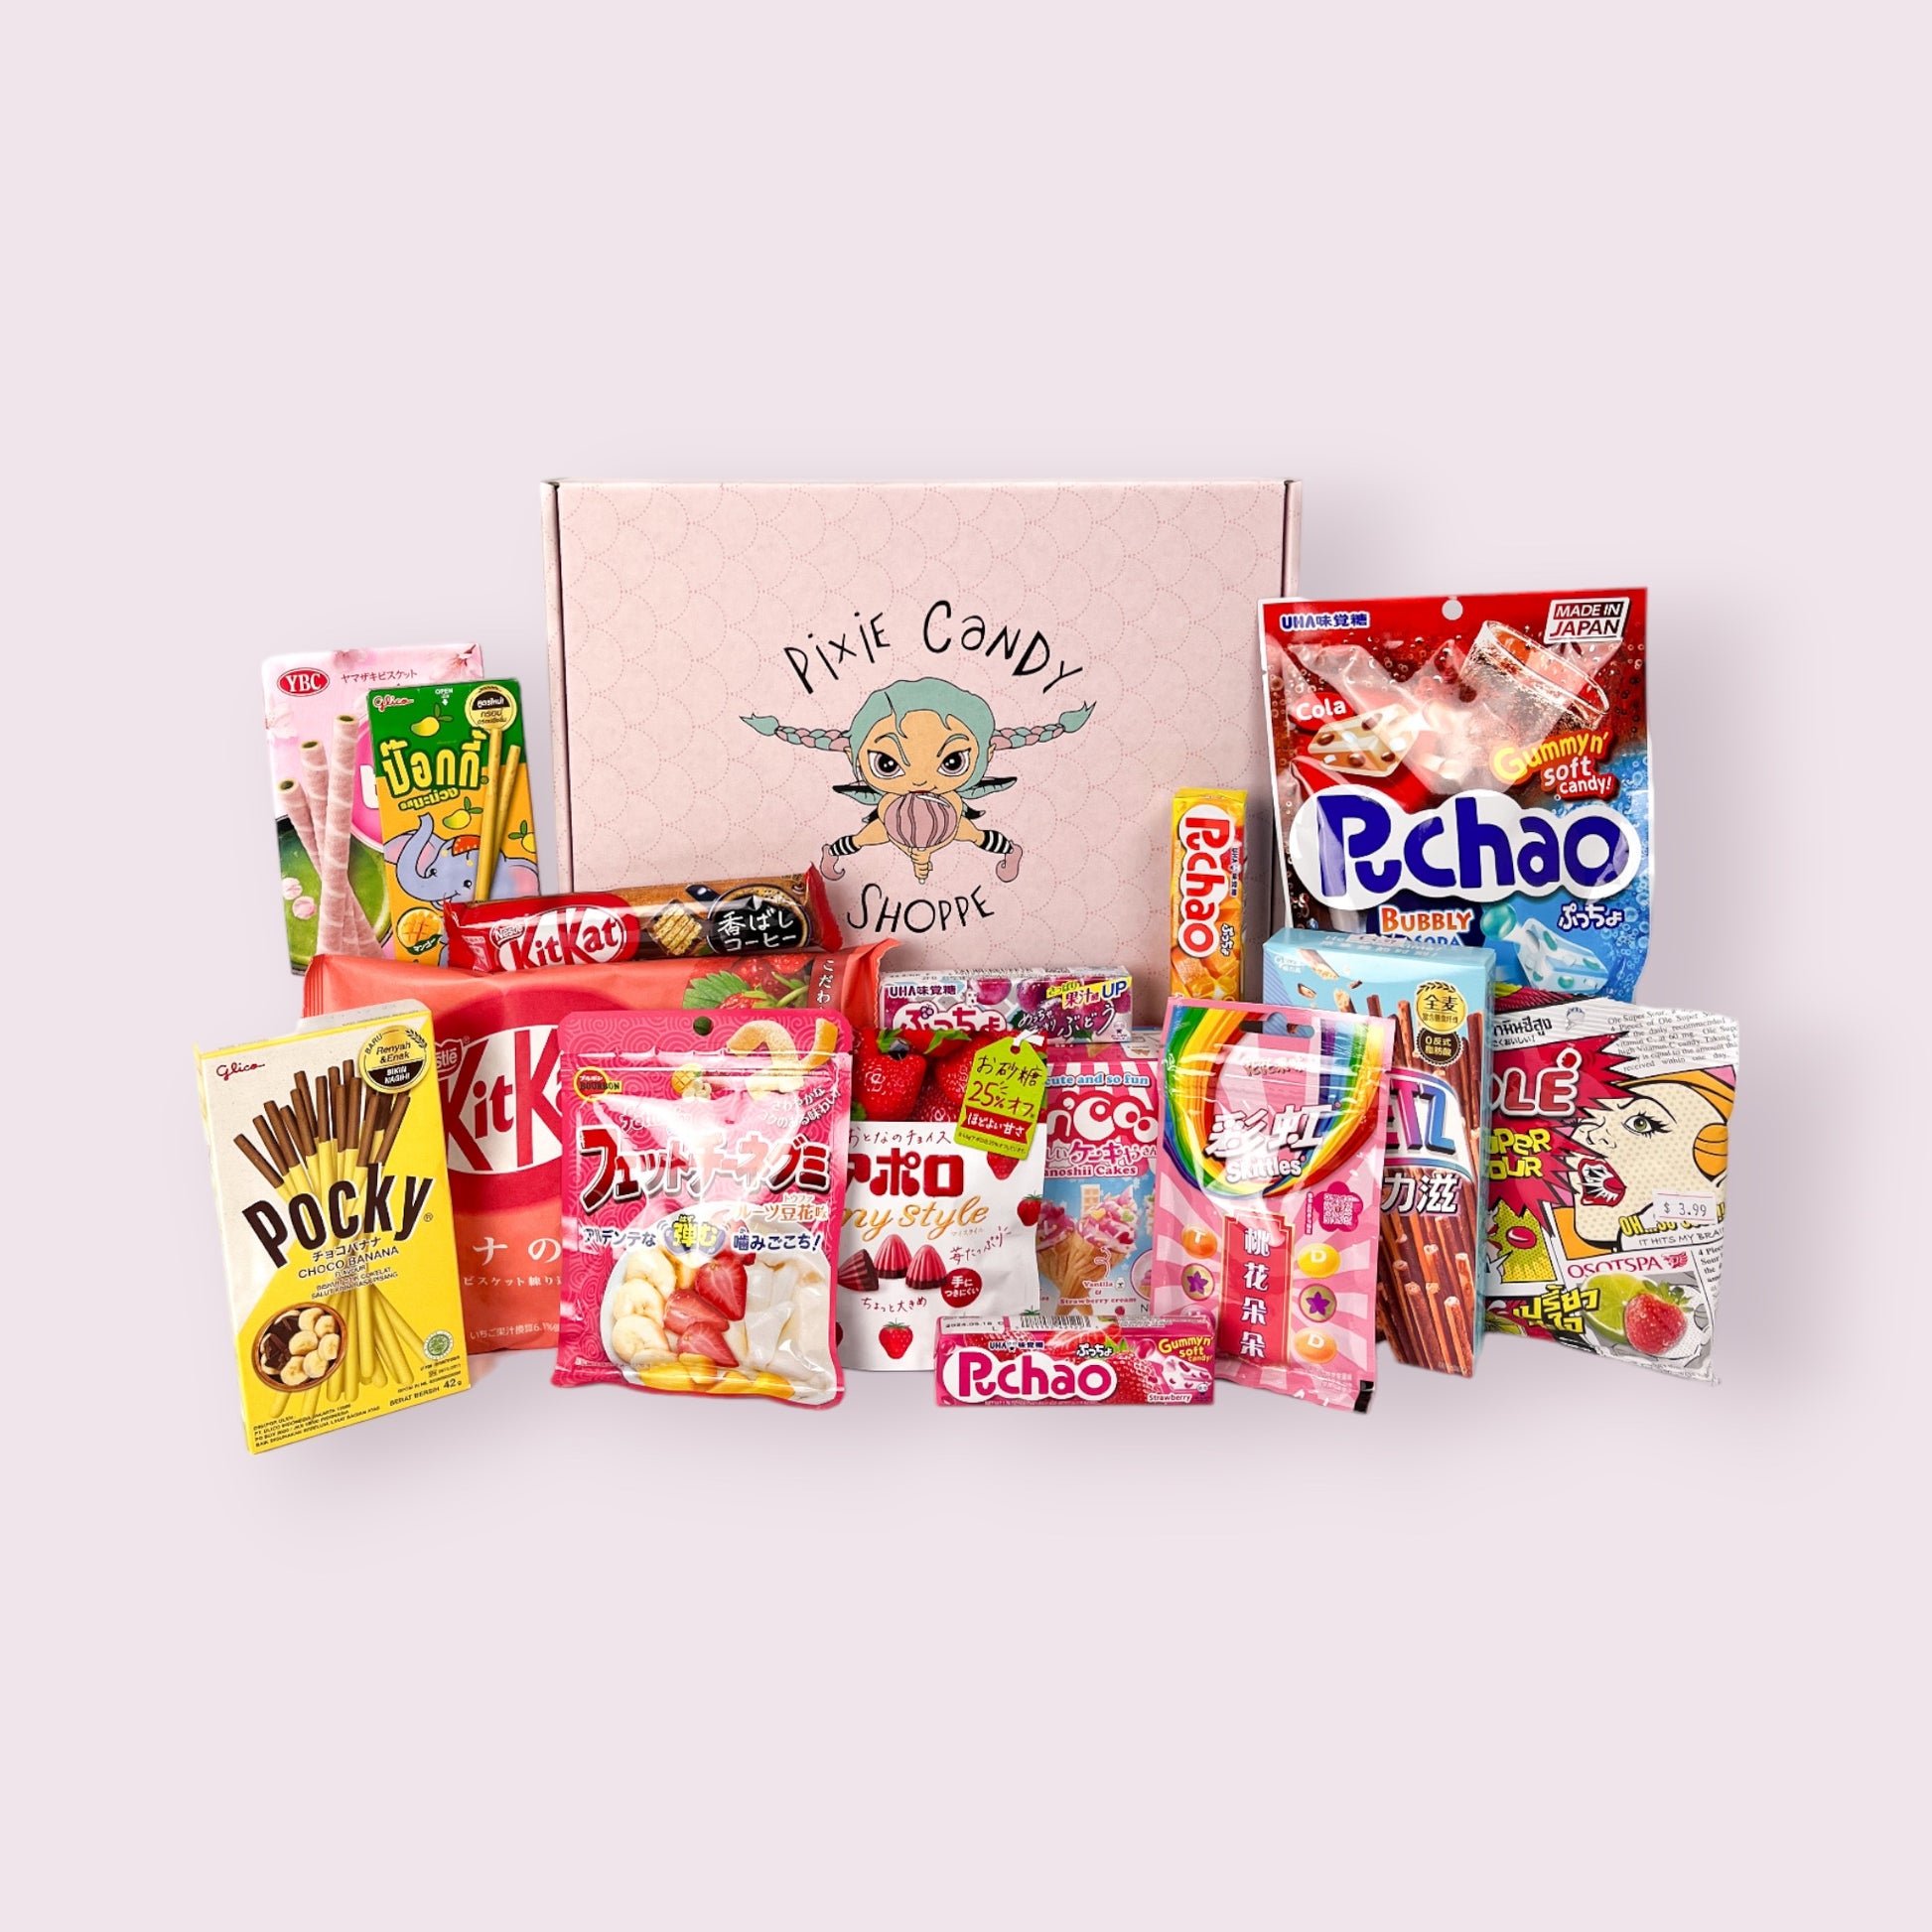 Japanese Candy Mystery Box Magical Mystery Box Pixie Candy Shoppe   